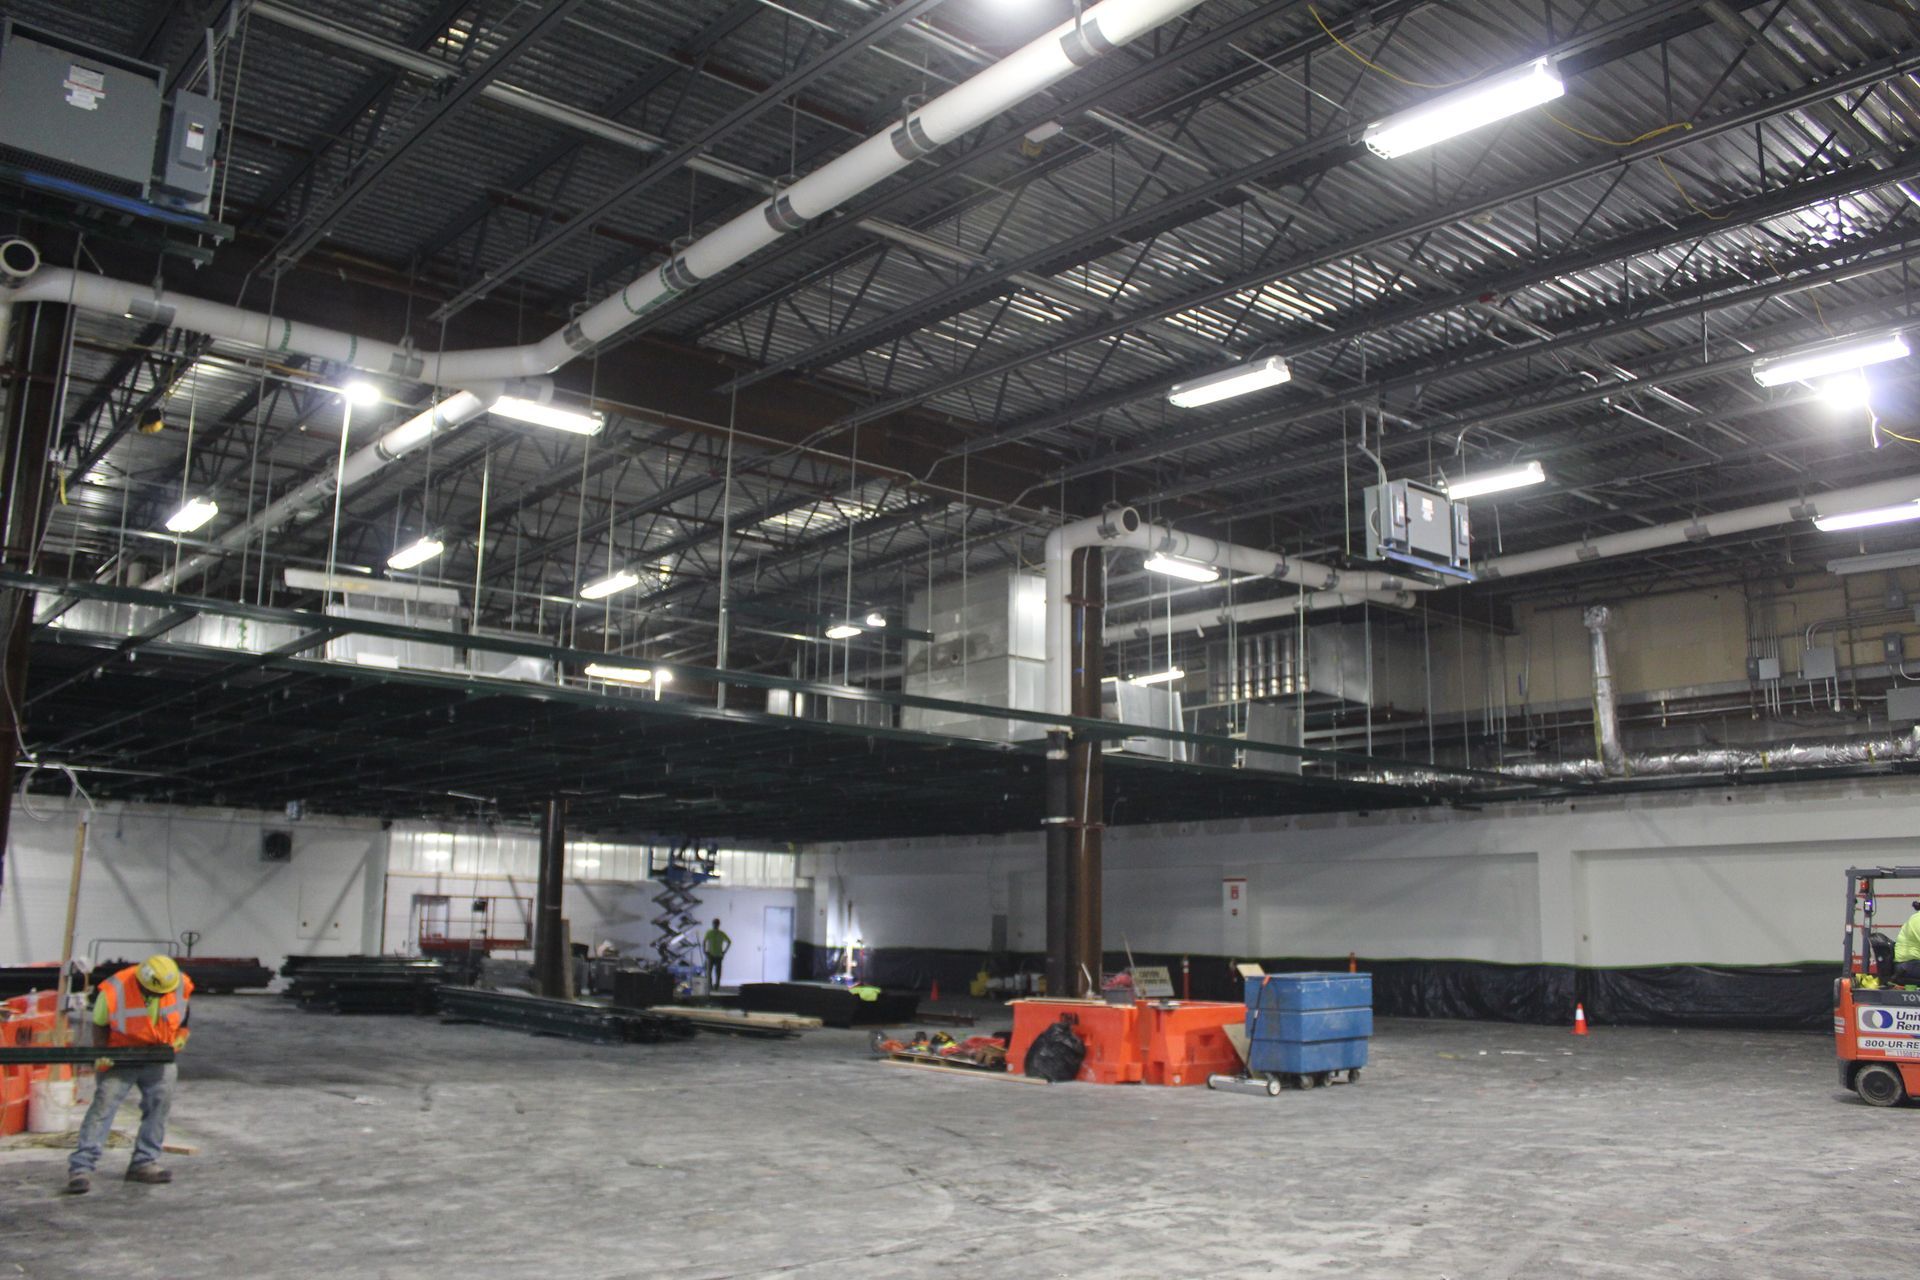 A man in a hard hat is standing in an empty warehouse.